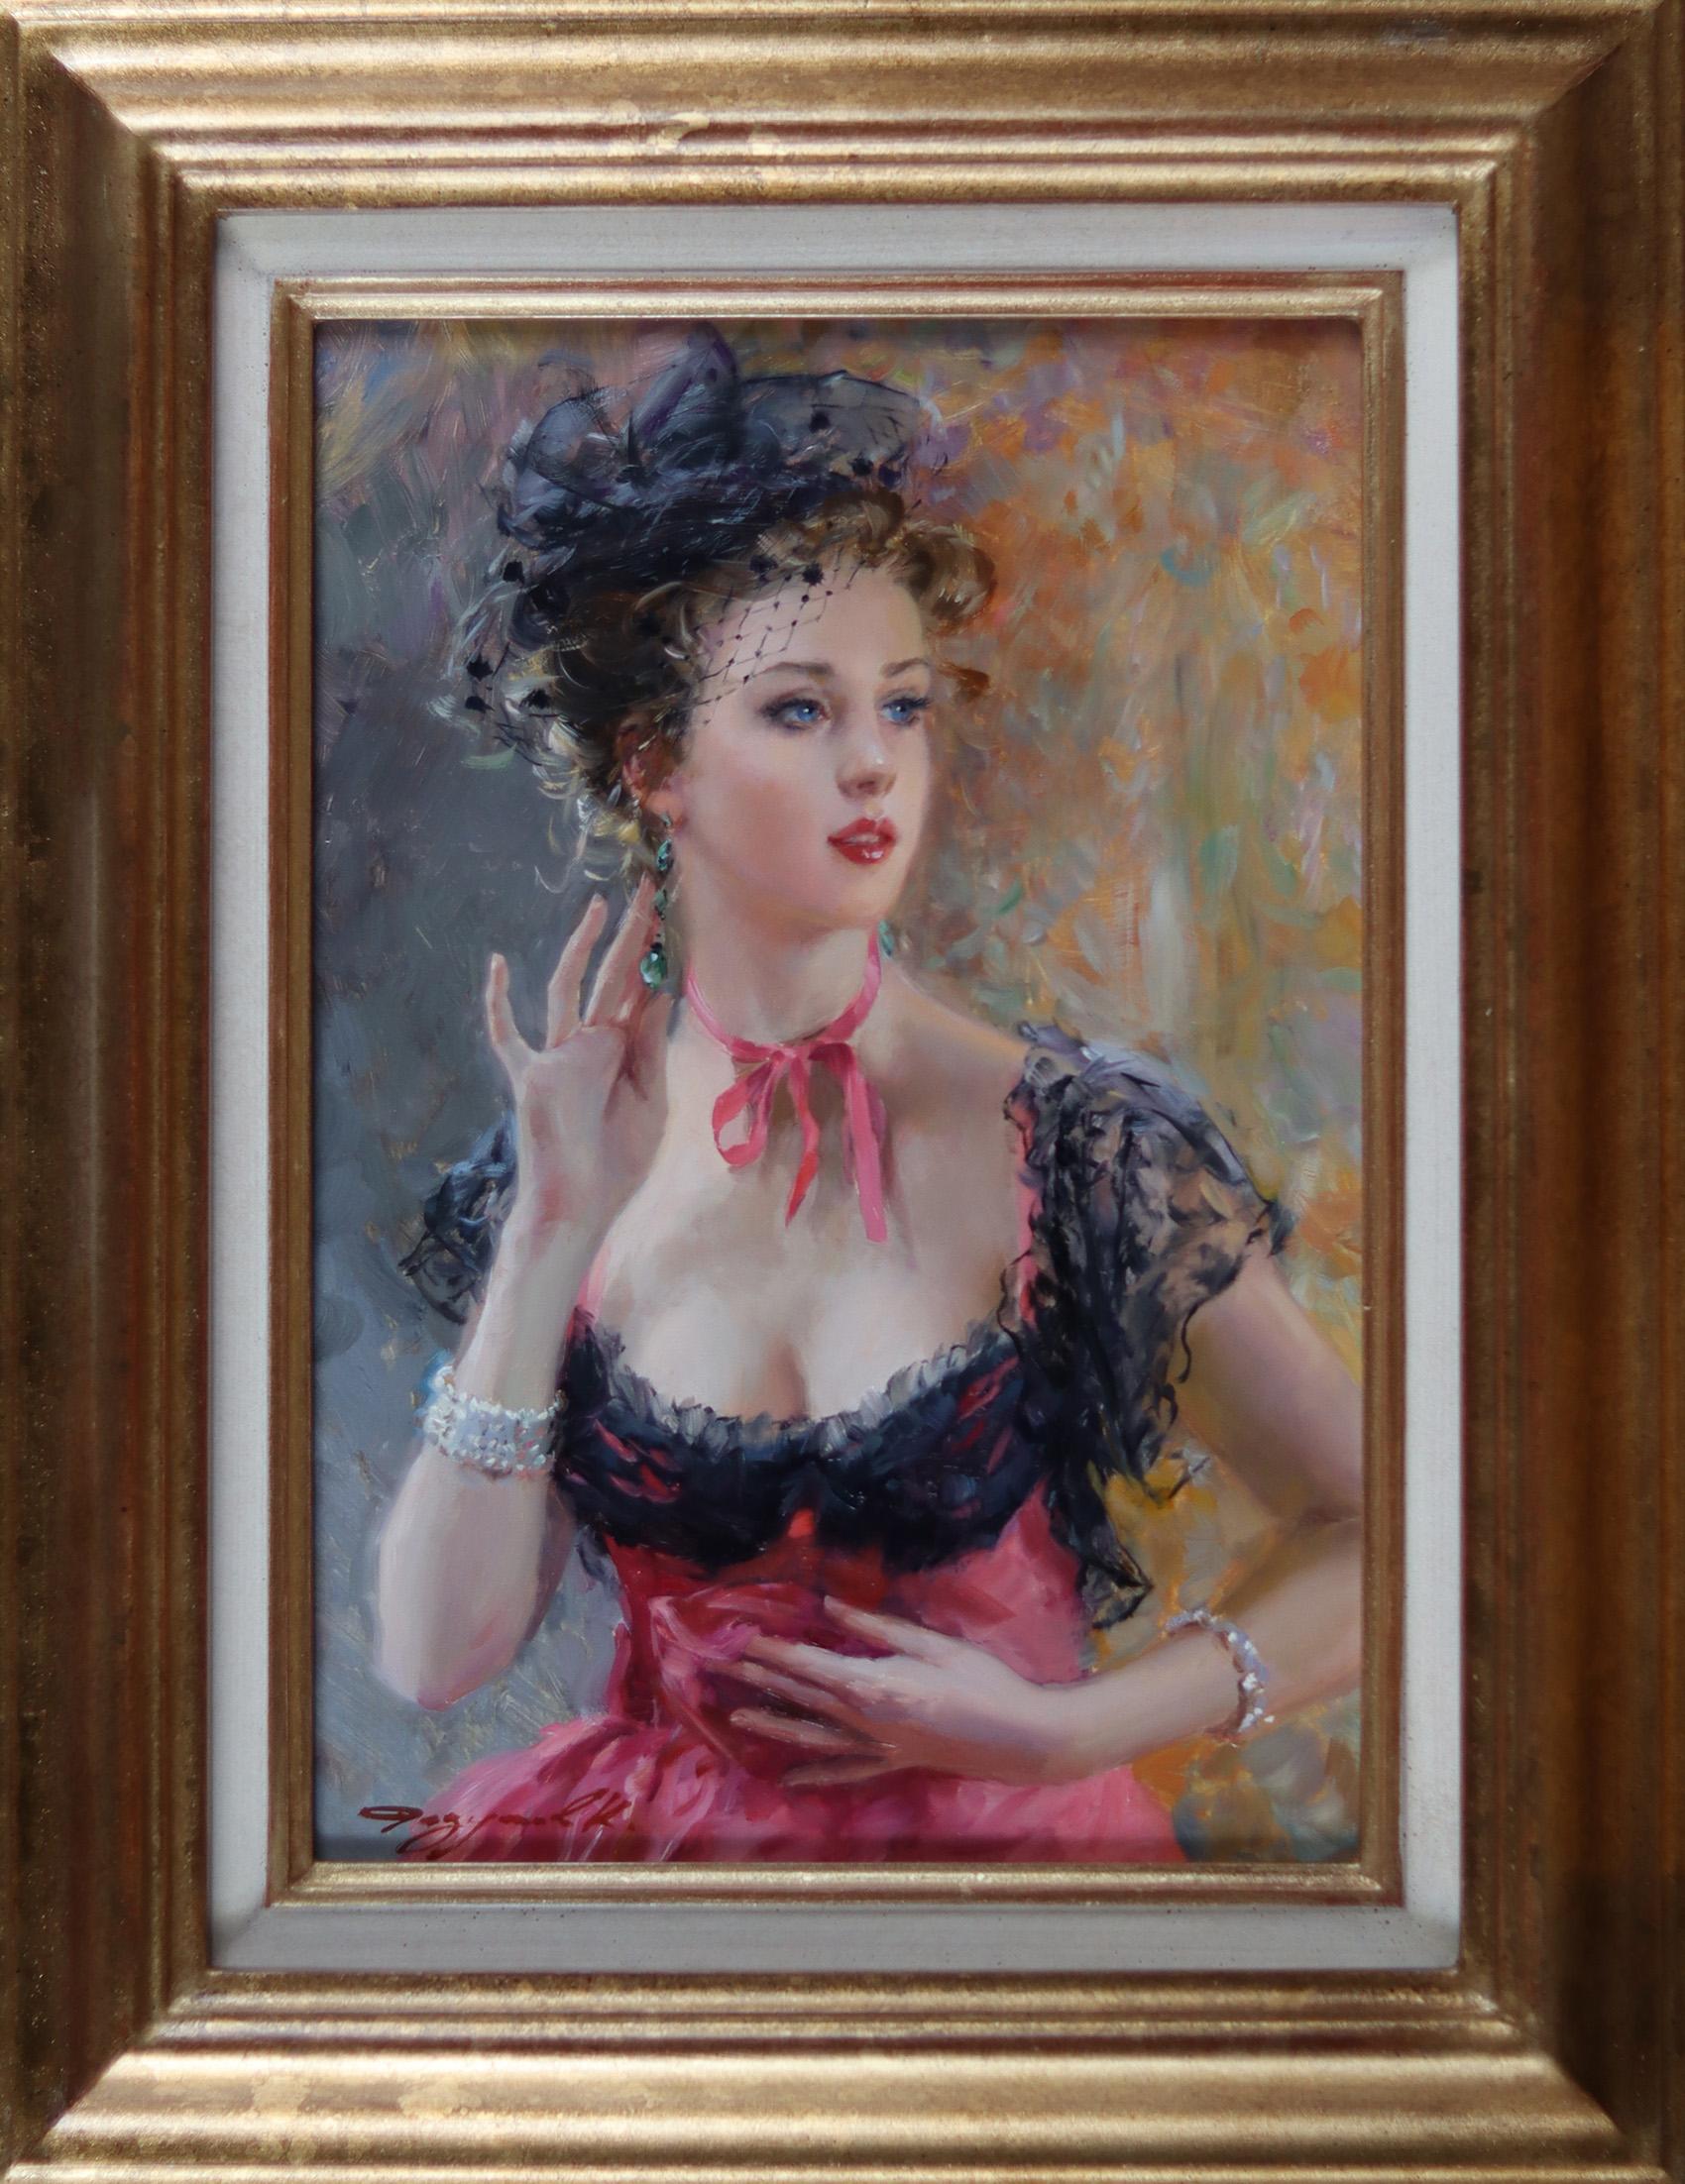 Elegant young lady in a red dress and black shawl                            - Painting by Konstantin Razumov 